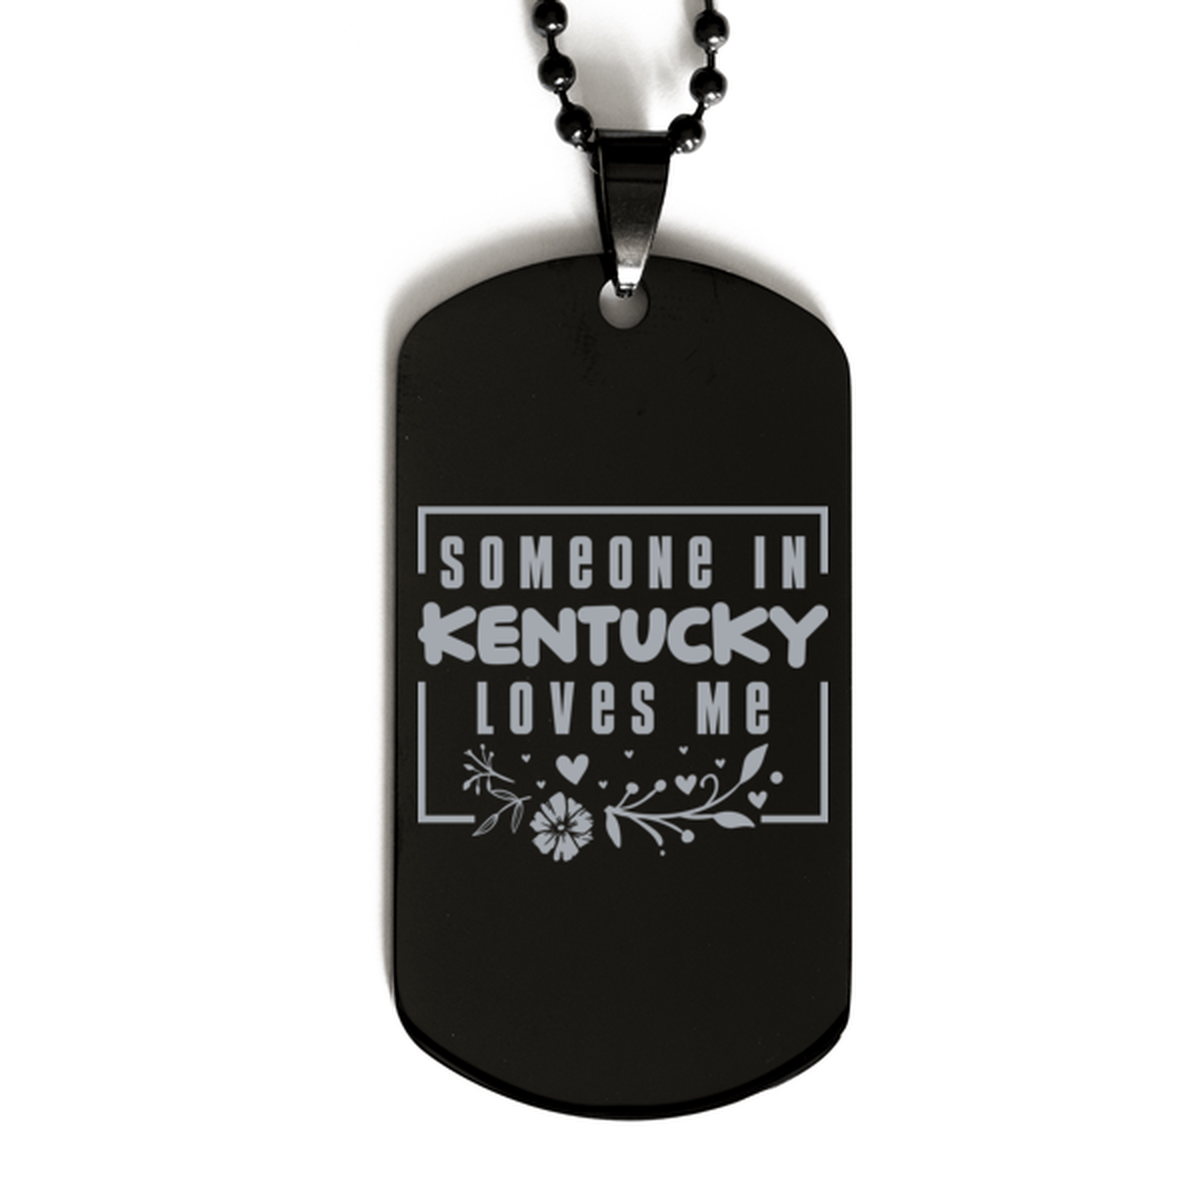 Cute Kentucky Black Dog Tag Necklace, Someone in Kentucky Loves Me, Best Birthday Gifts from Kentucky Friends & Family